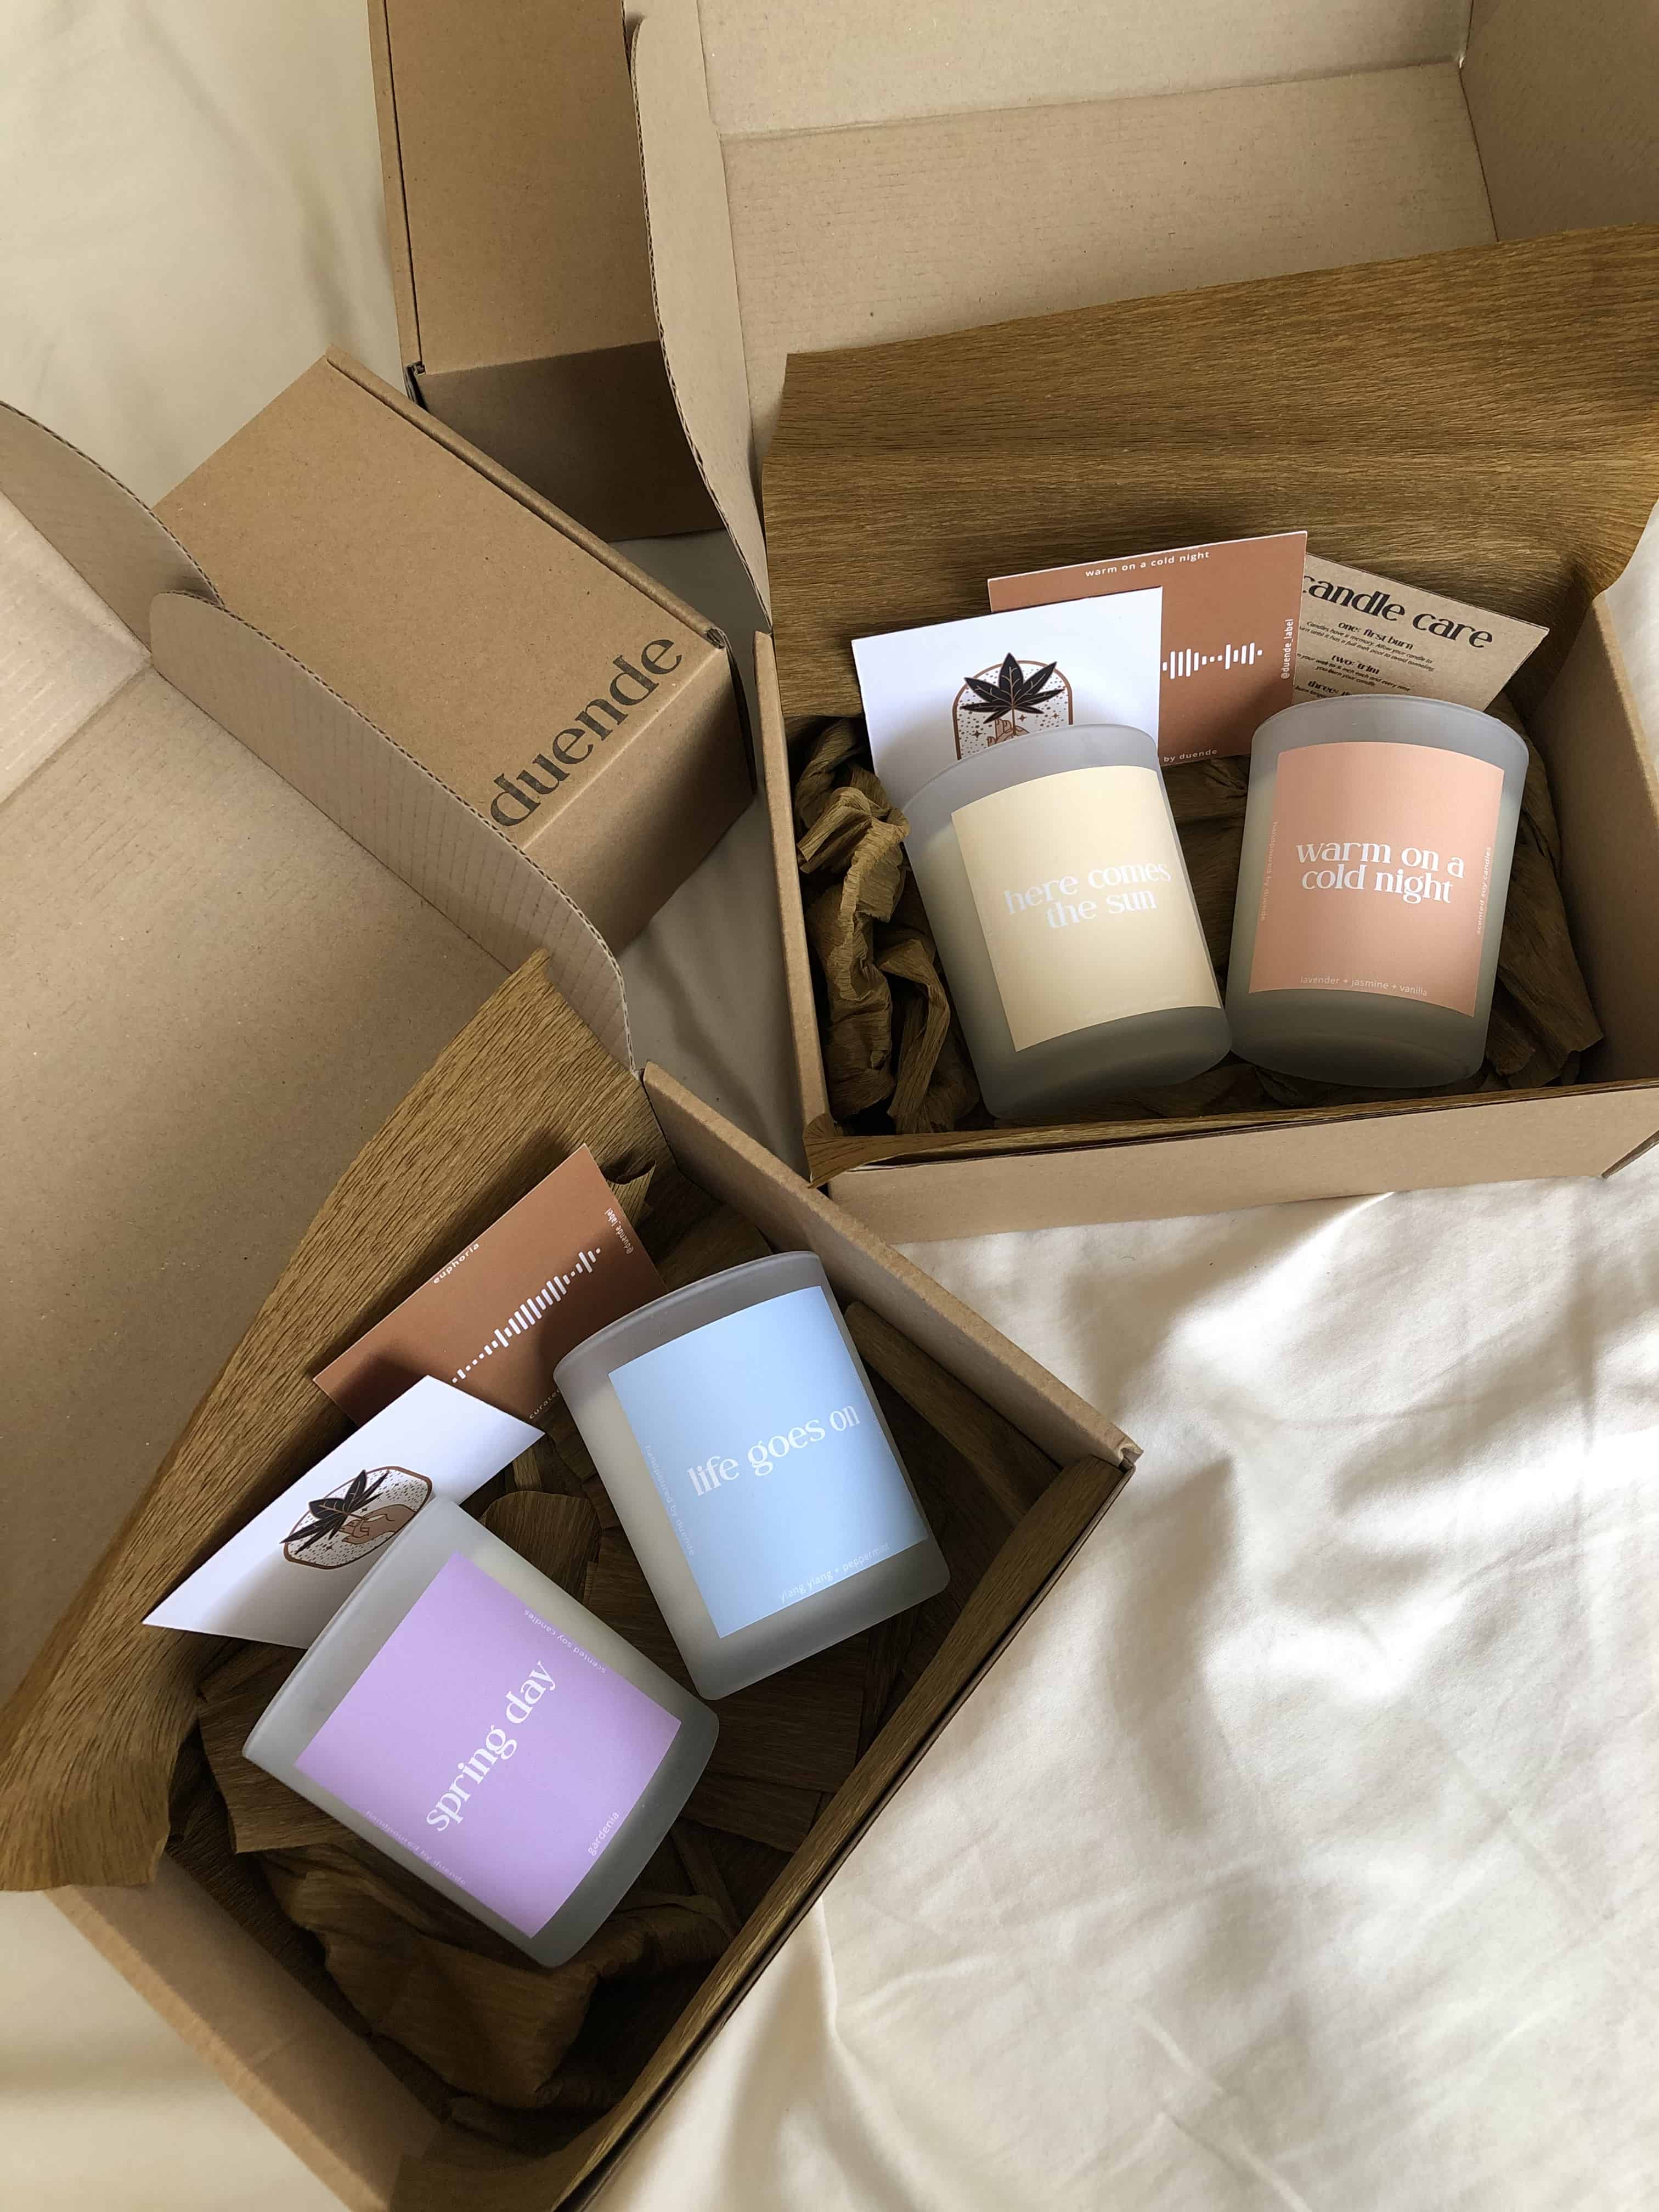 Scented candles inspired by BTS' songs